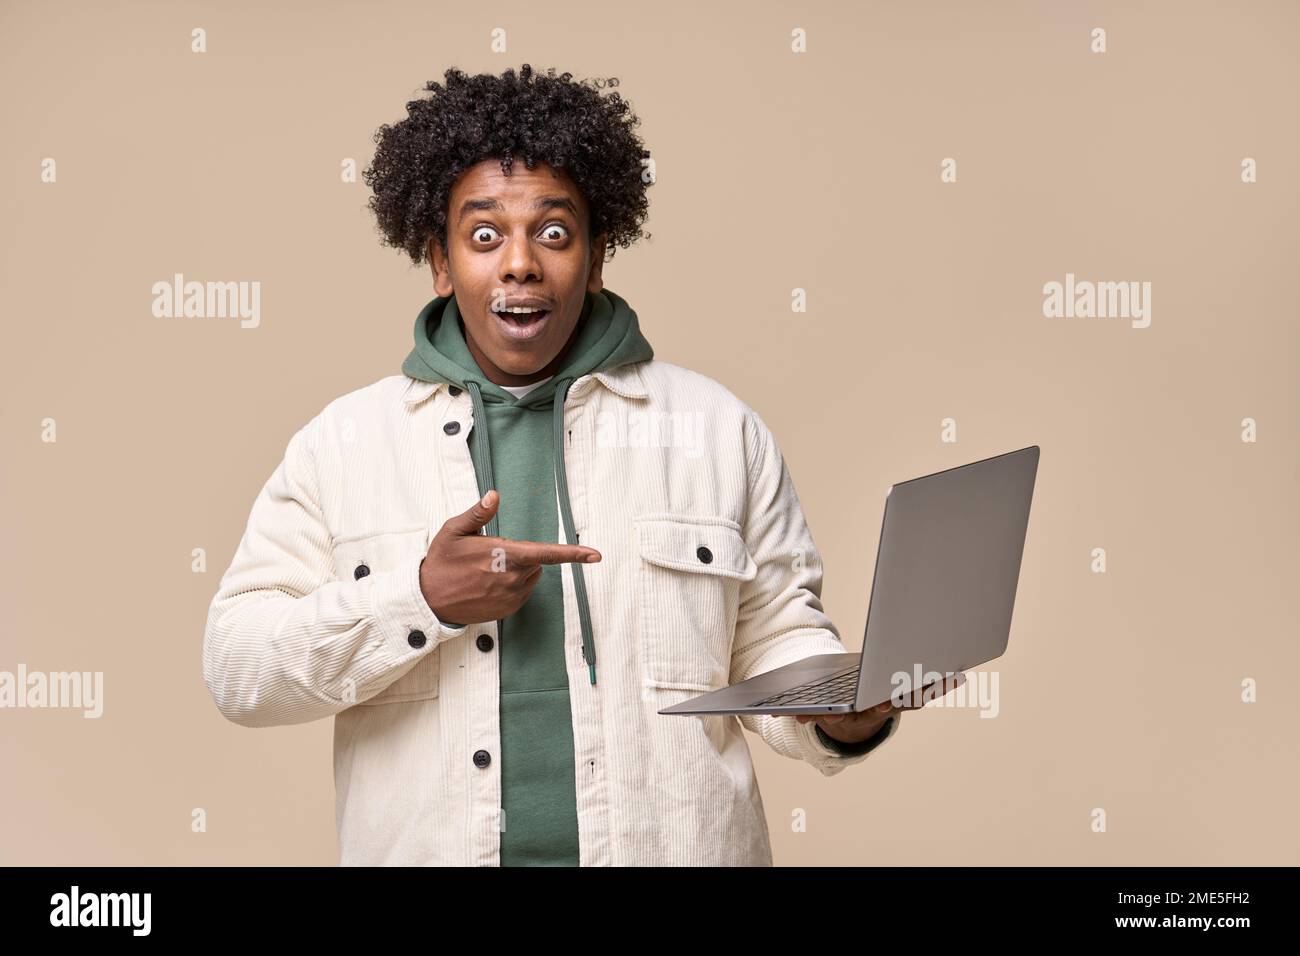 Surprised African guy holding laptop pointing at computer advertising wow offer. Stock Photo